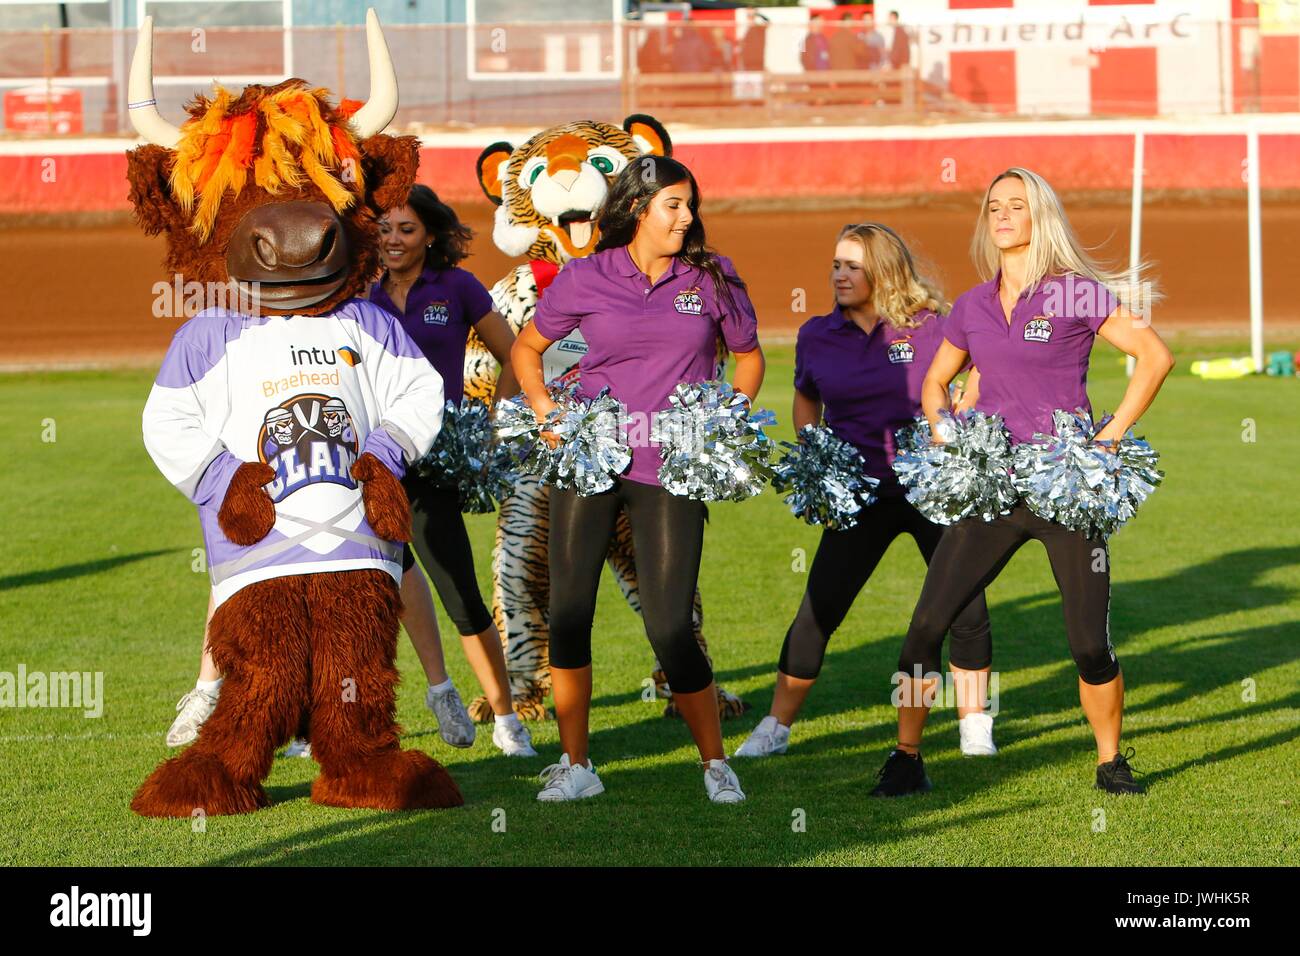 Glasgow, Scotland, UK. 12th August, 2017. Glasgow Tigers Welcomed Clangus and the Girls from Braehead Clan Credit: Colin Poultney/Alamy Live News Stock Photo